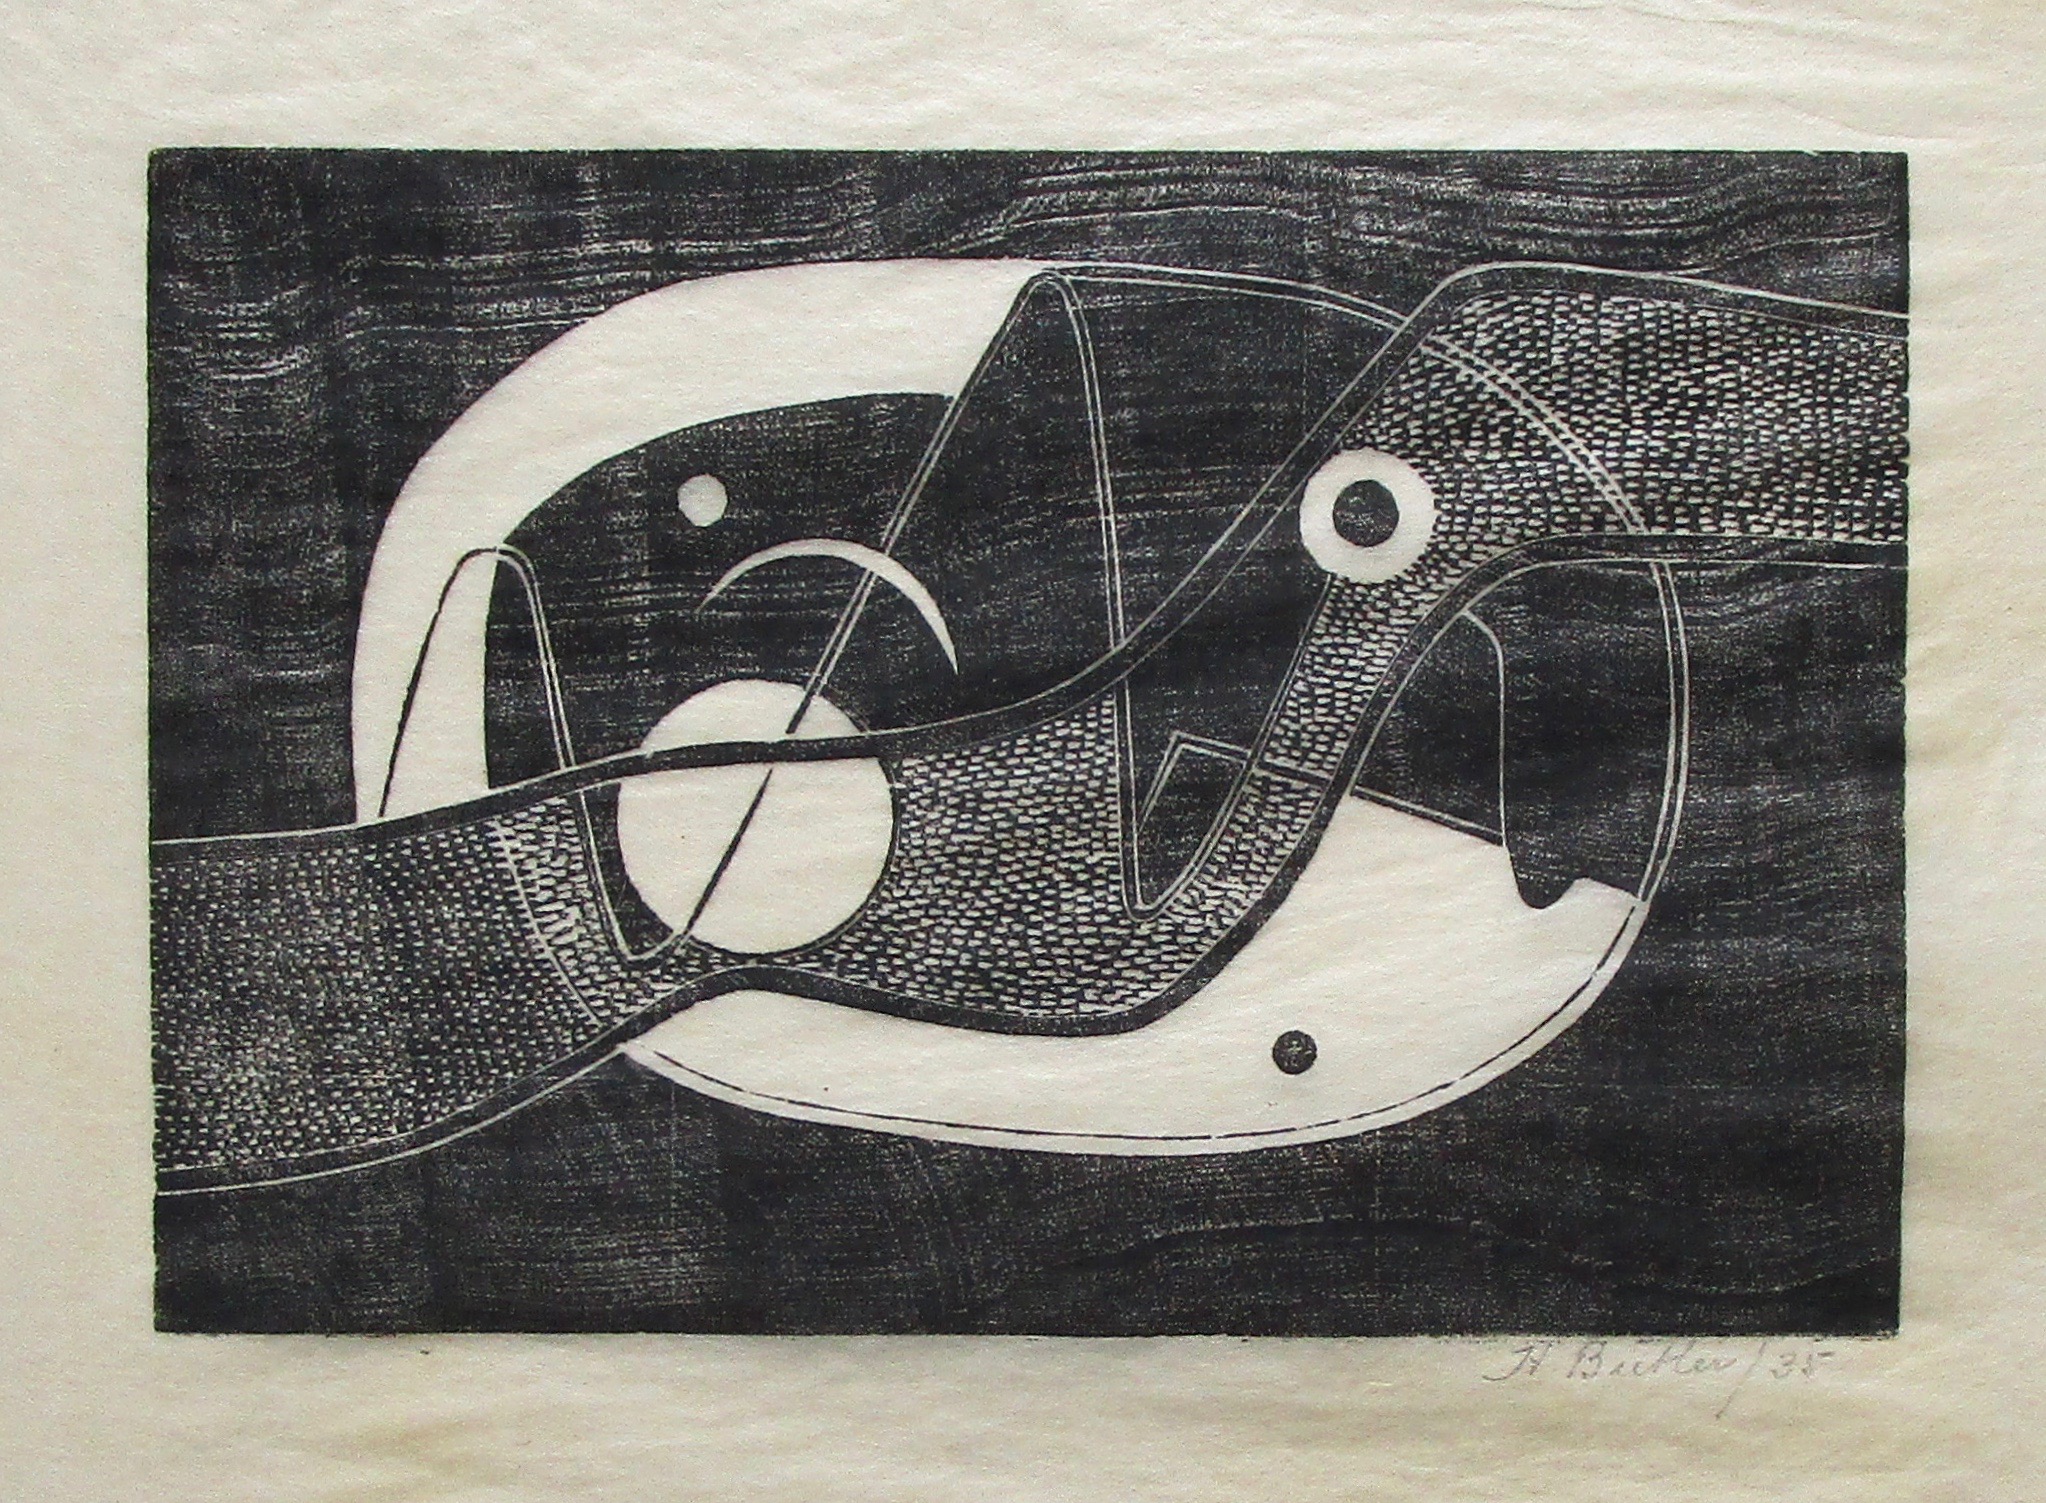 HENRY BUTLER [1882-1967]. Untitled, 1935. Woodcut on tissue paper mounted onto card. Signed